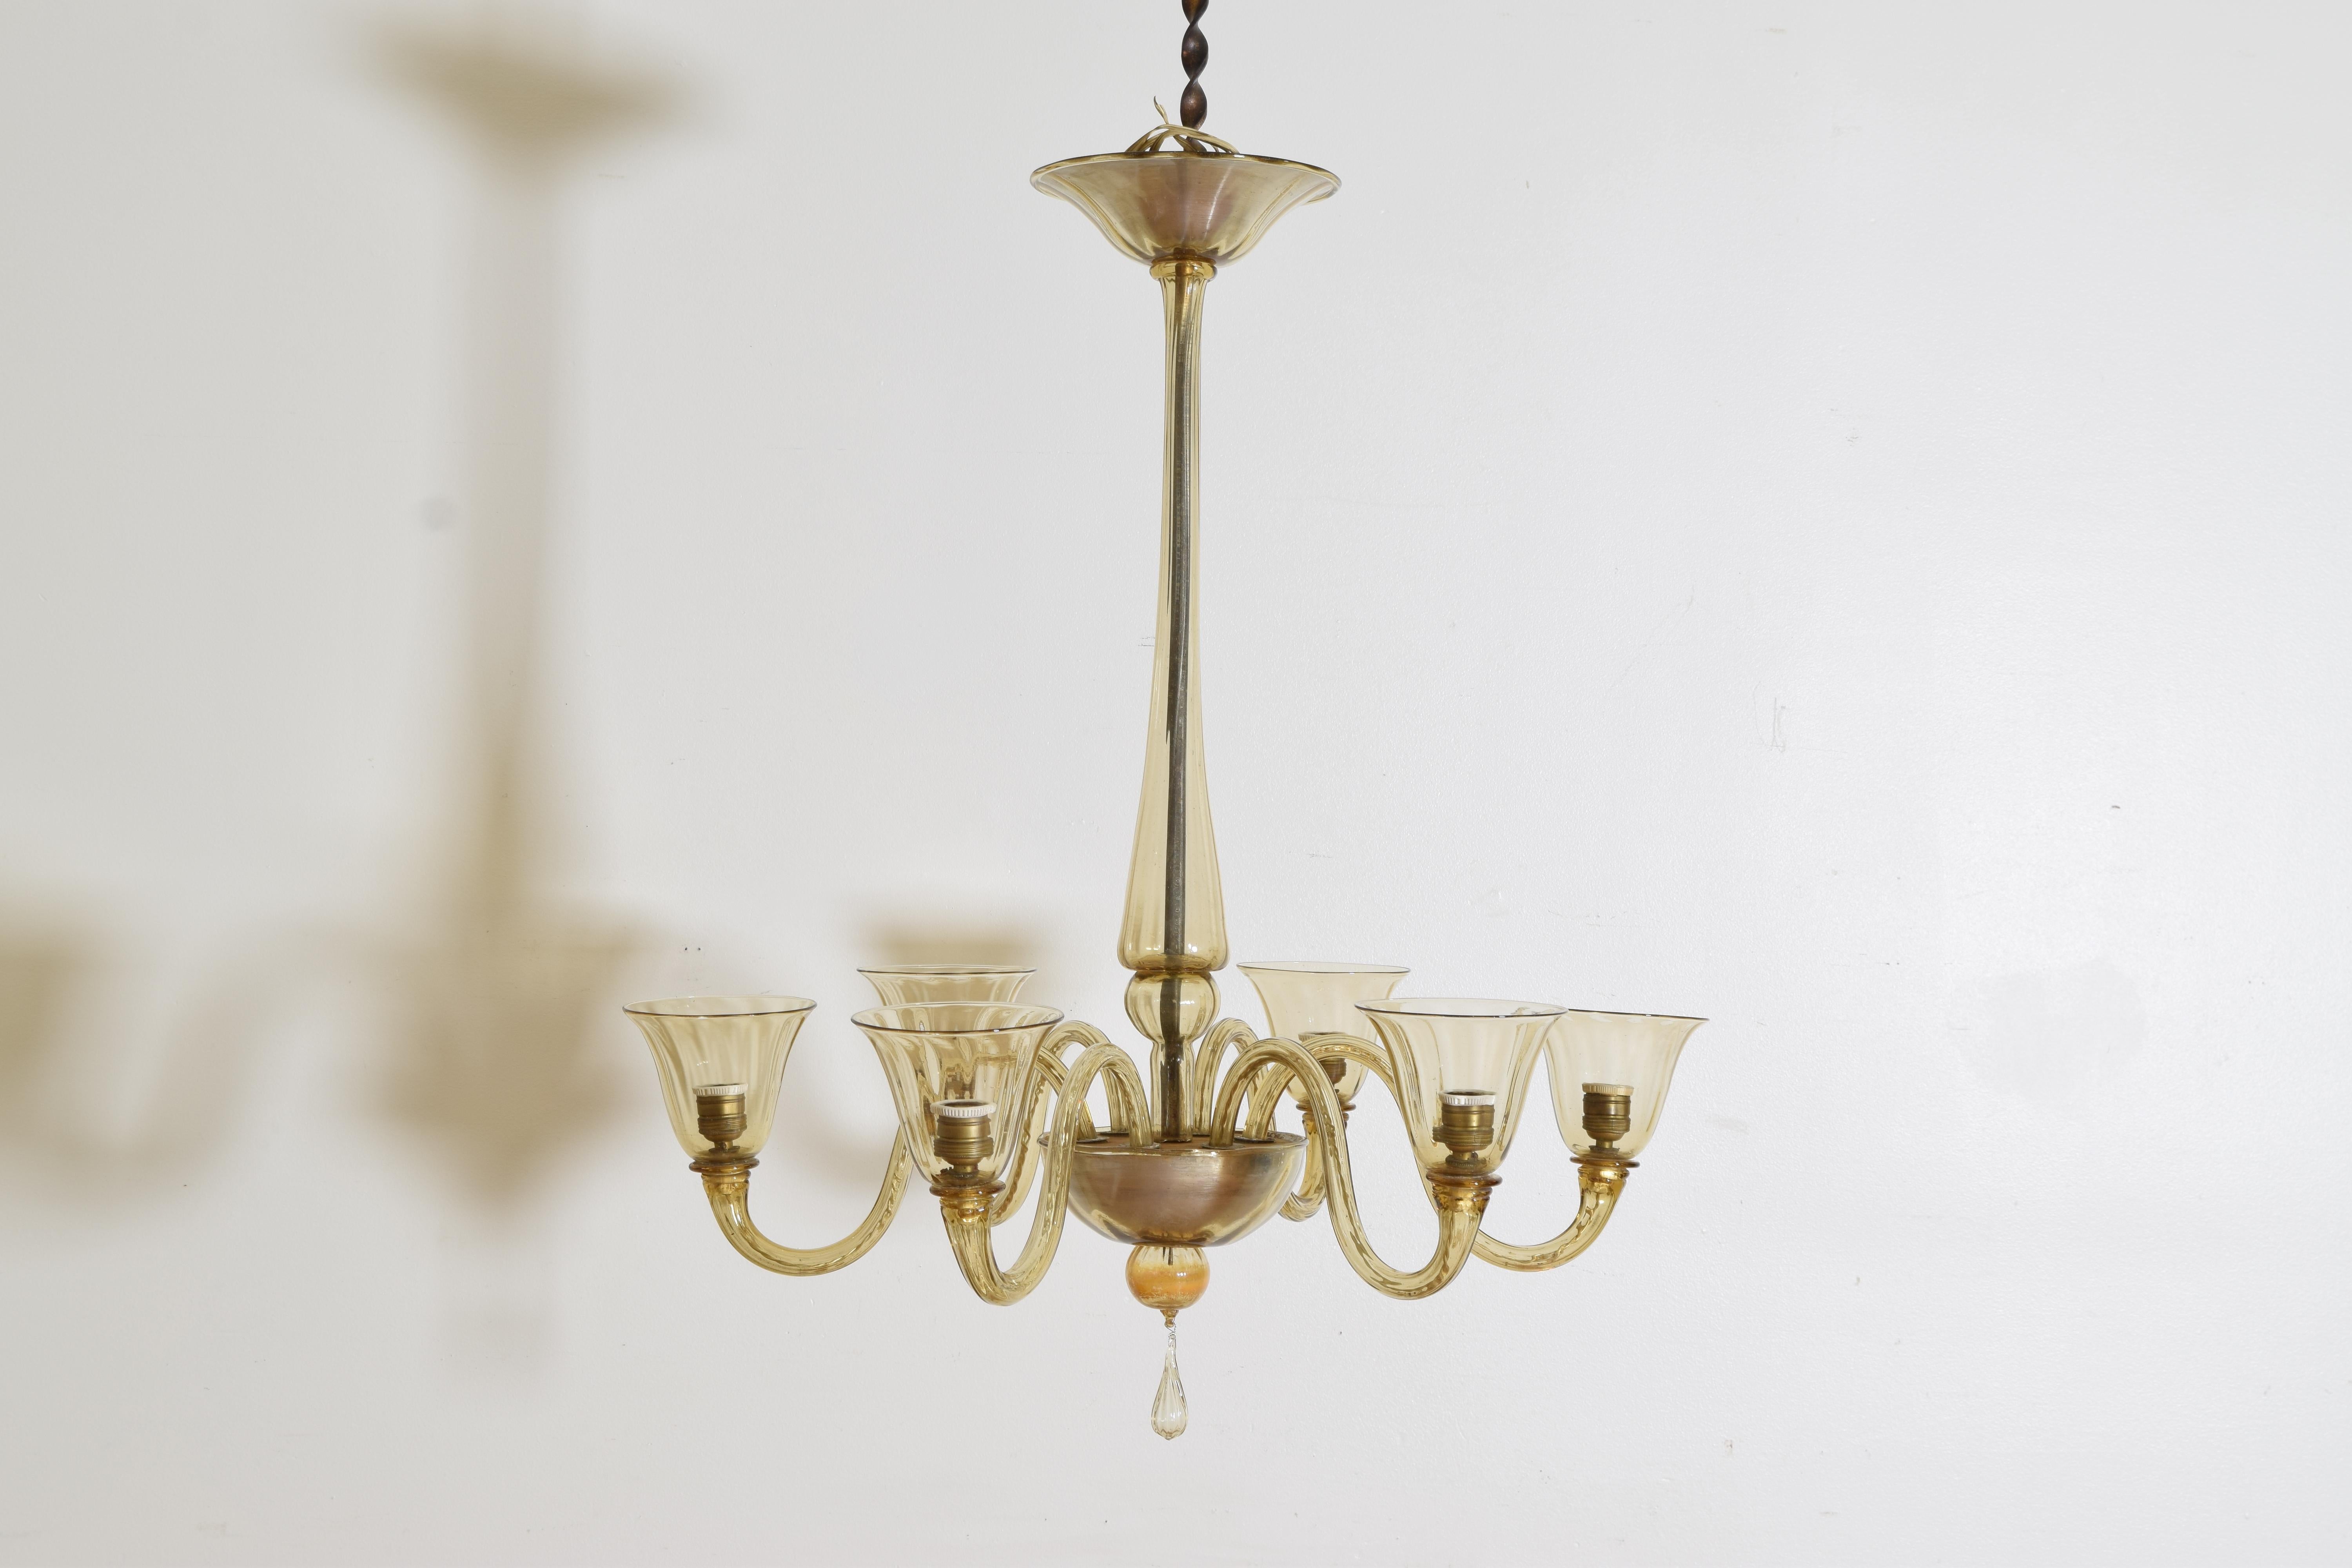 Constructed entirely of blown glass components with a canopy atop a straight standard, the center section issuing six curved arms with large bobeches/shades, the shaped bottom with a hanging glass tassel